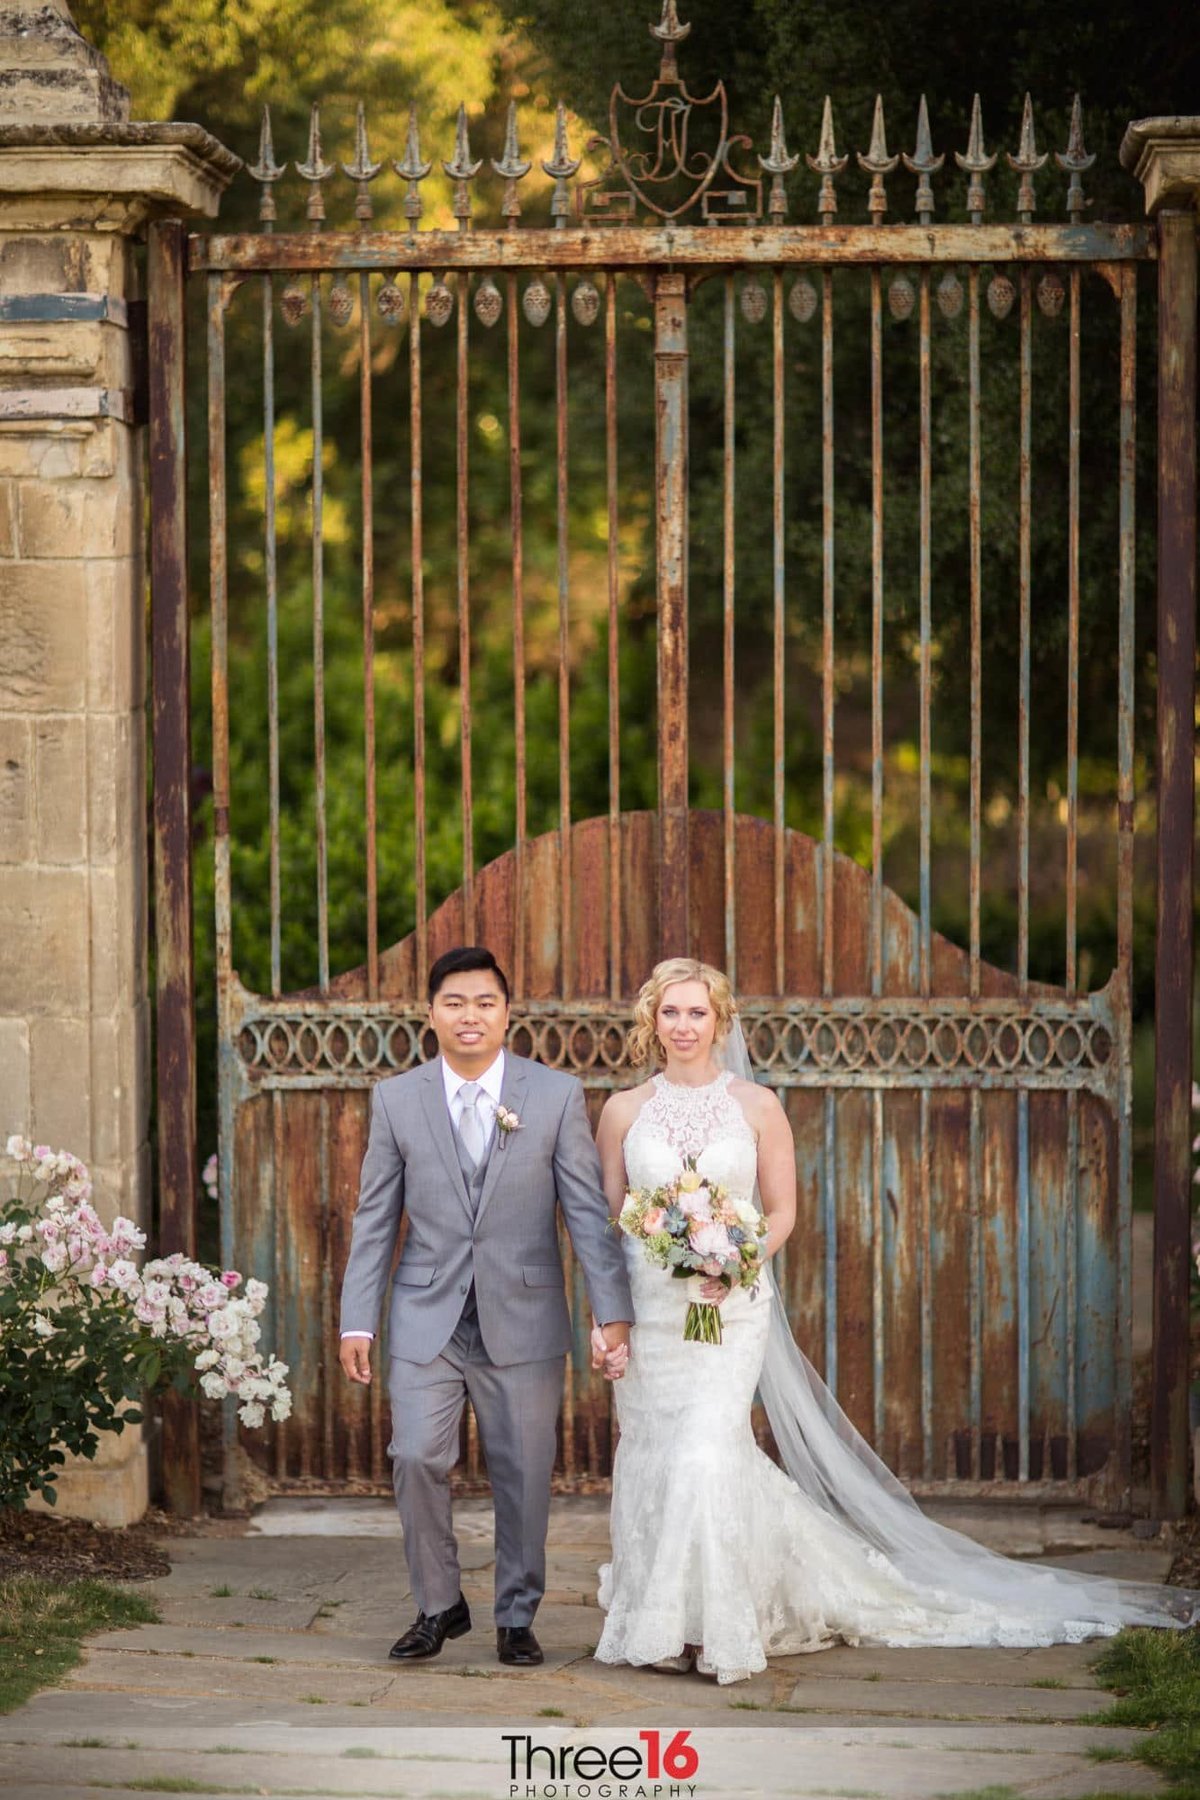 Newly married couple pose in front of the main gate